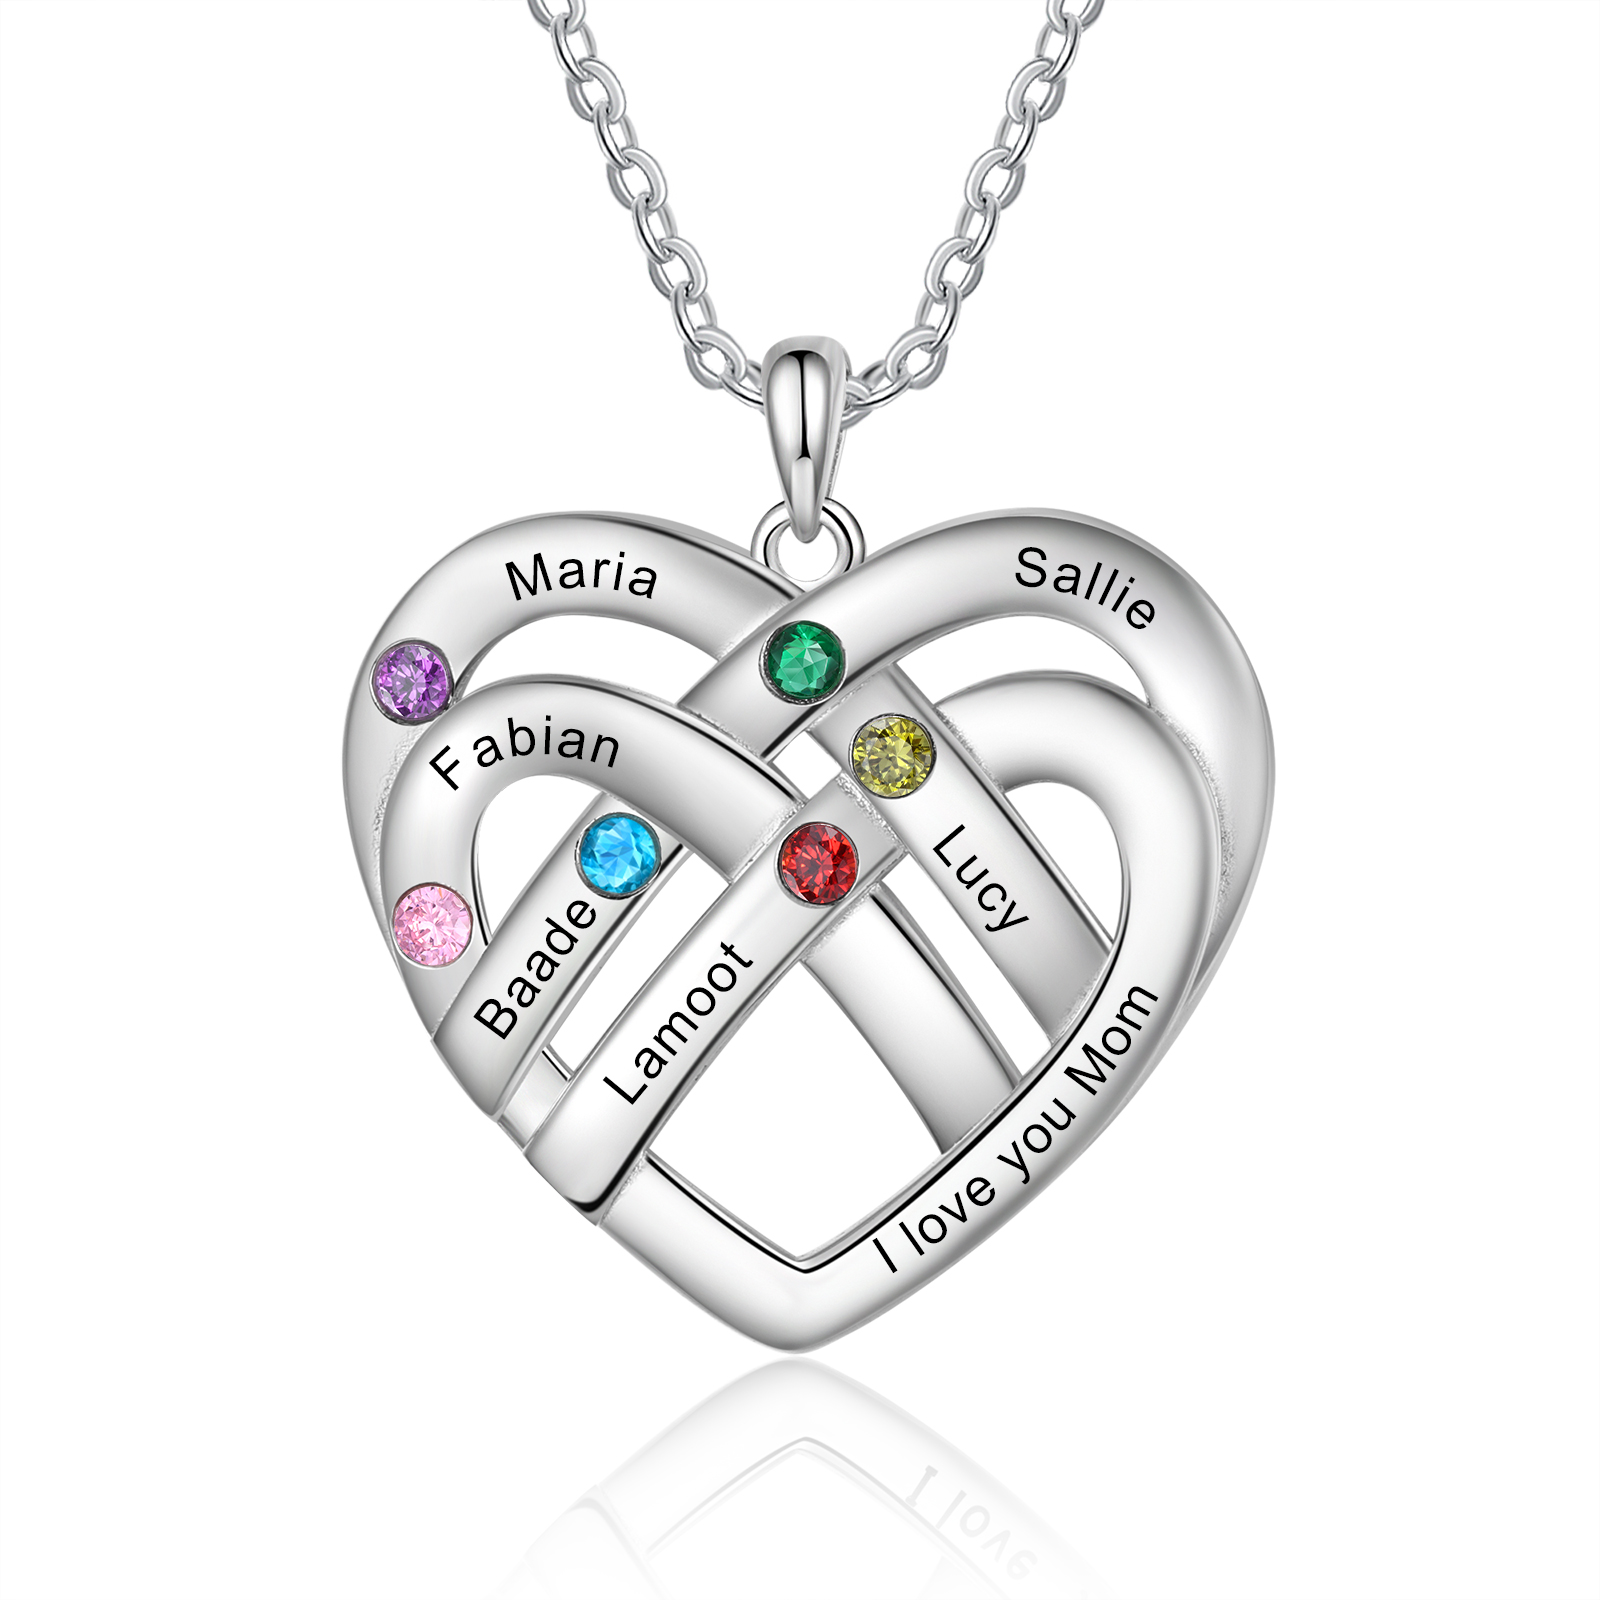 6 Names - Personalized Double Layer Heart Necklace with Custom Name an